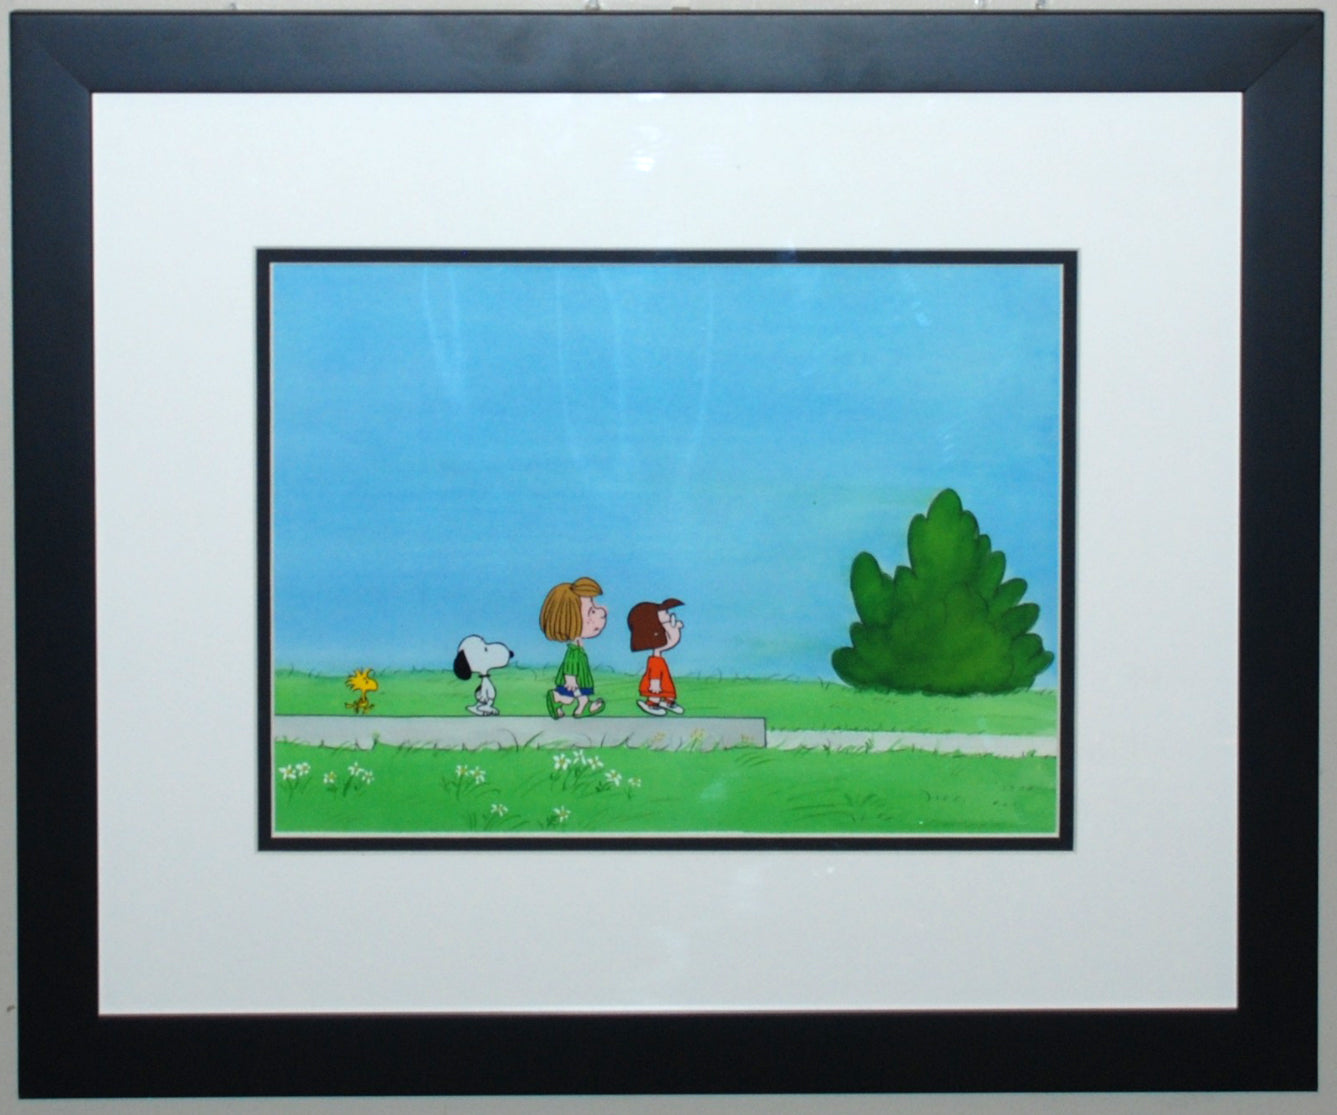 Original Peanuts Production Cel on Production Background featuring Peppermint Patty, Marcie, Snoopy, and Woodstock